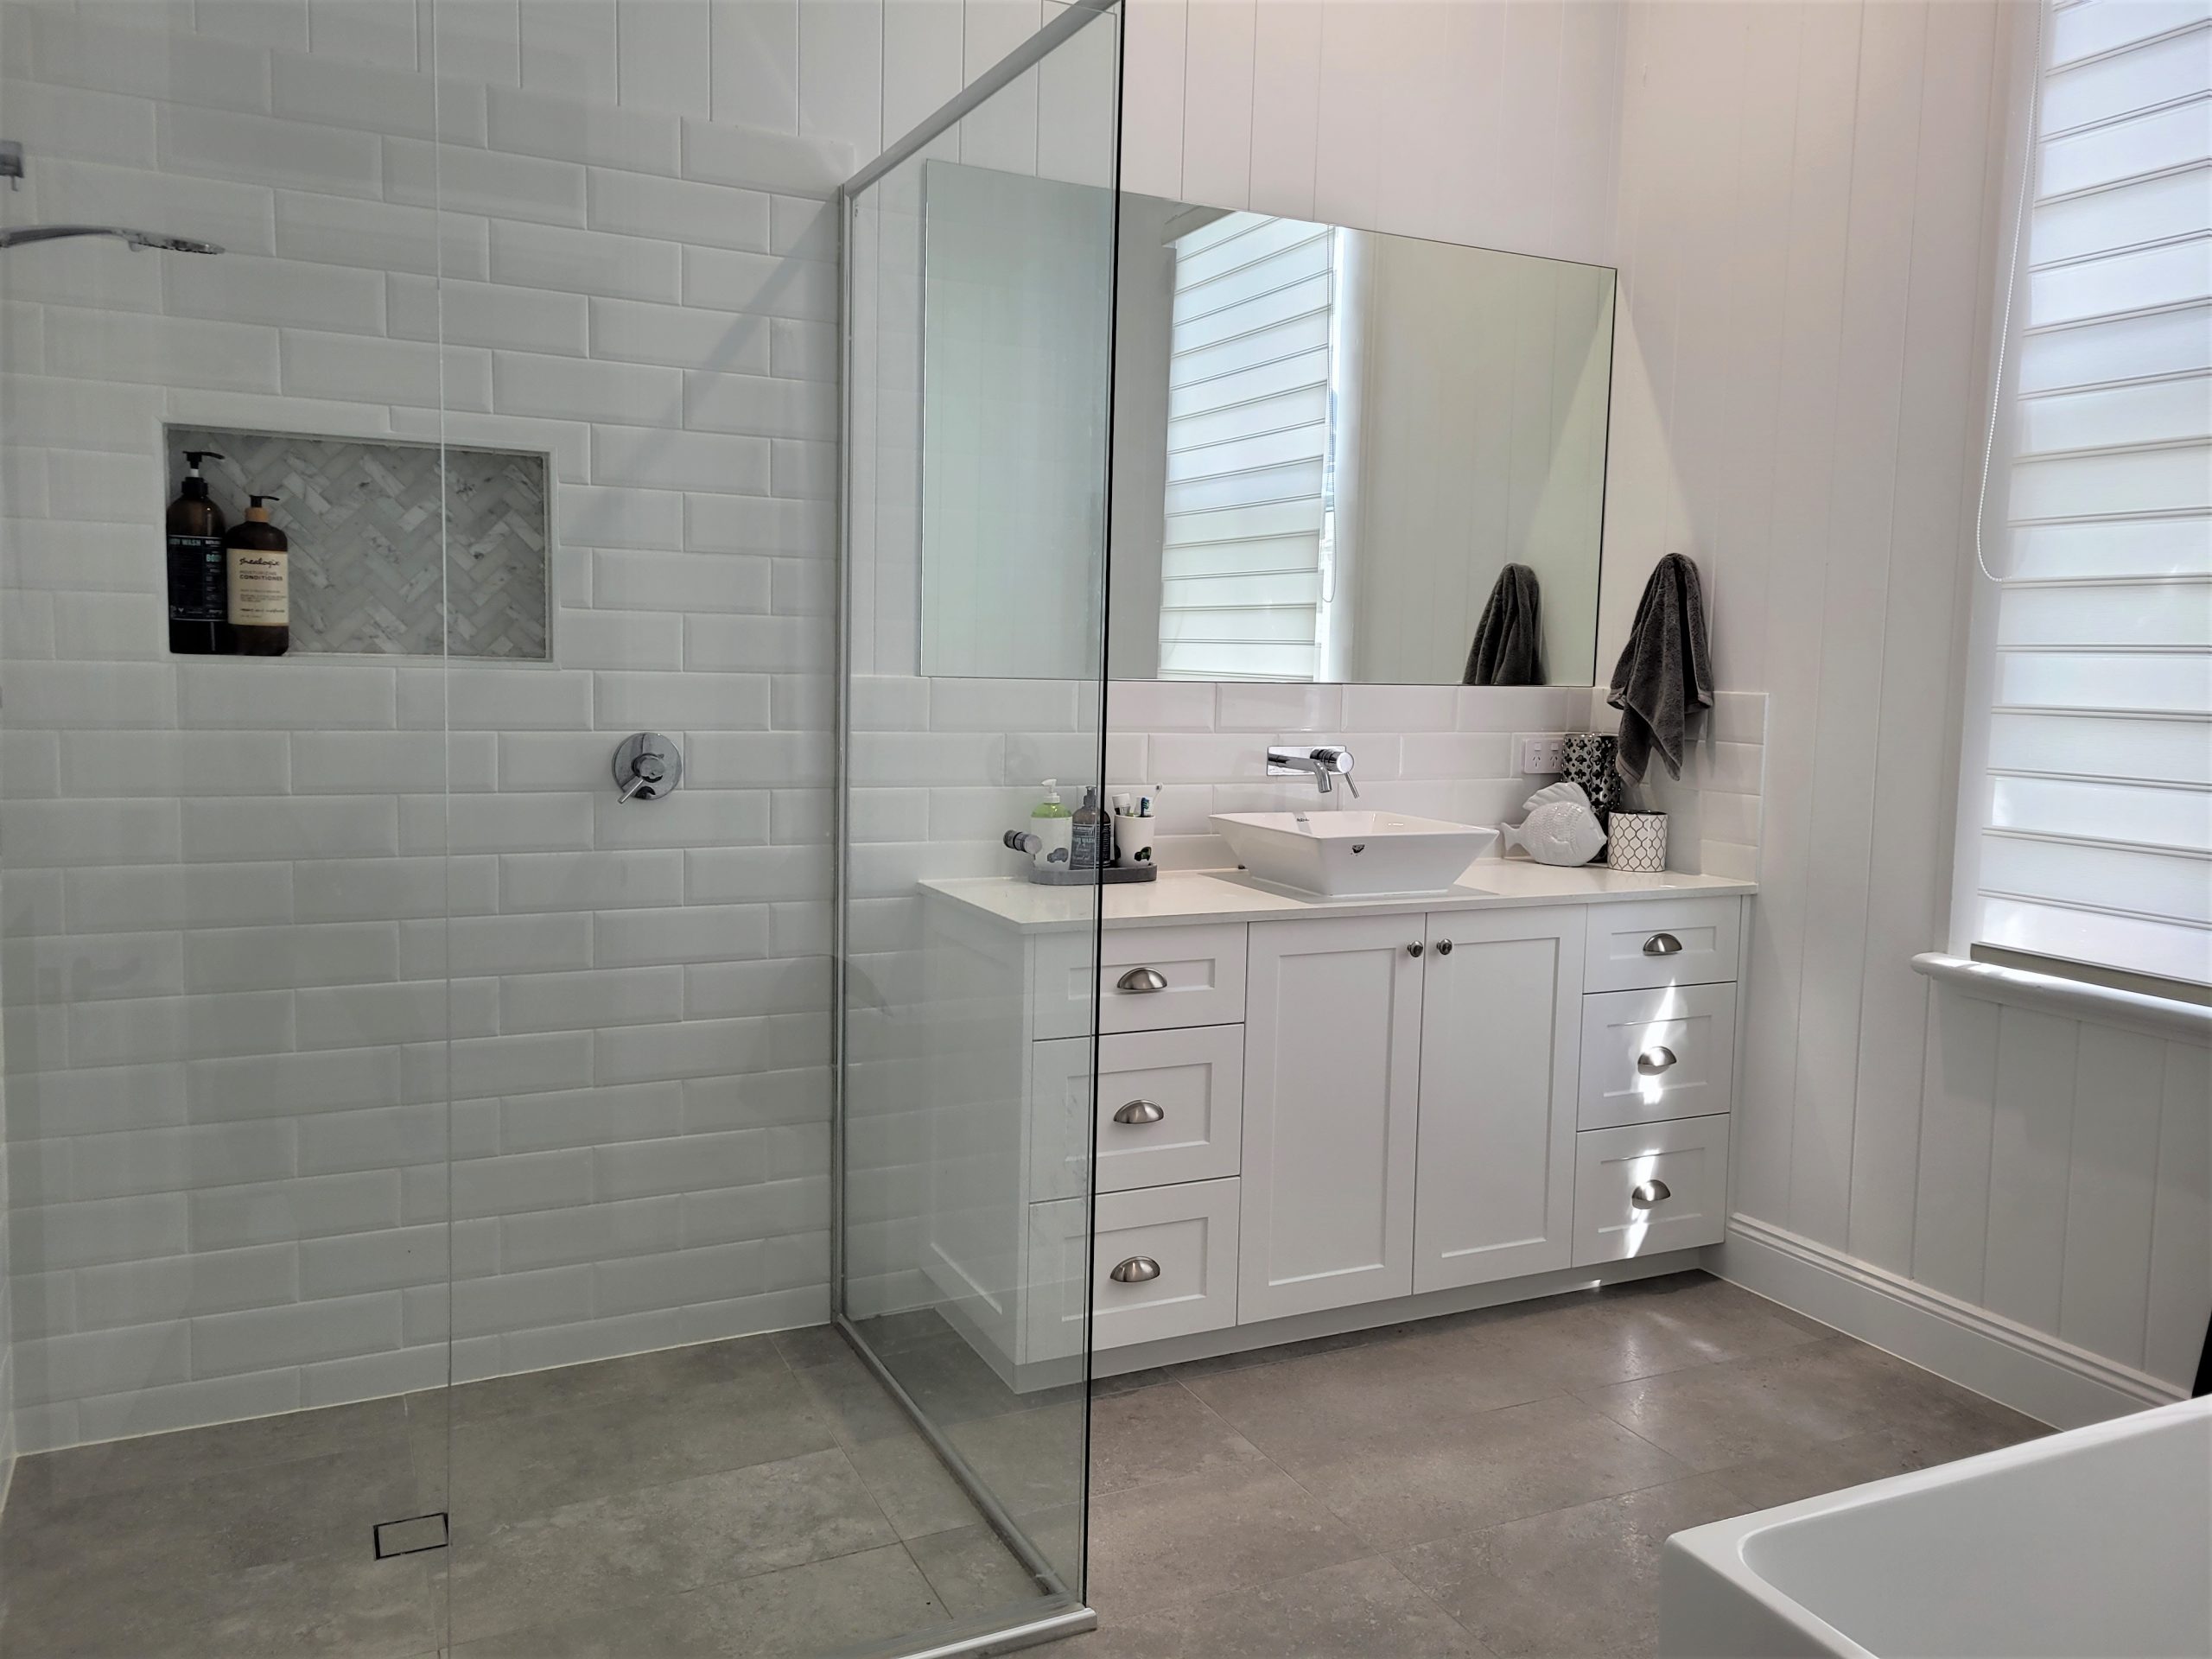 Bathroom | Featured image for the Home page for Renovare Sunshine Coast Central.